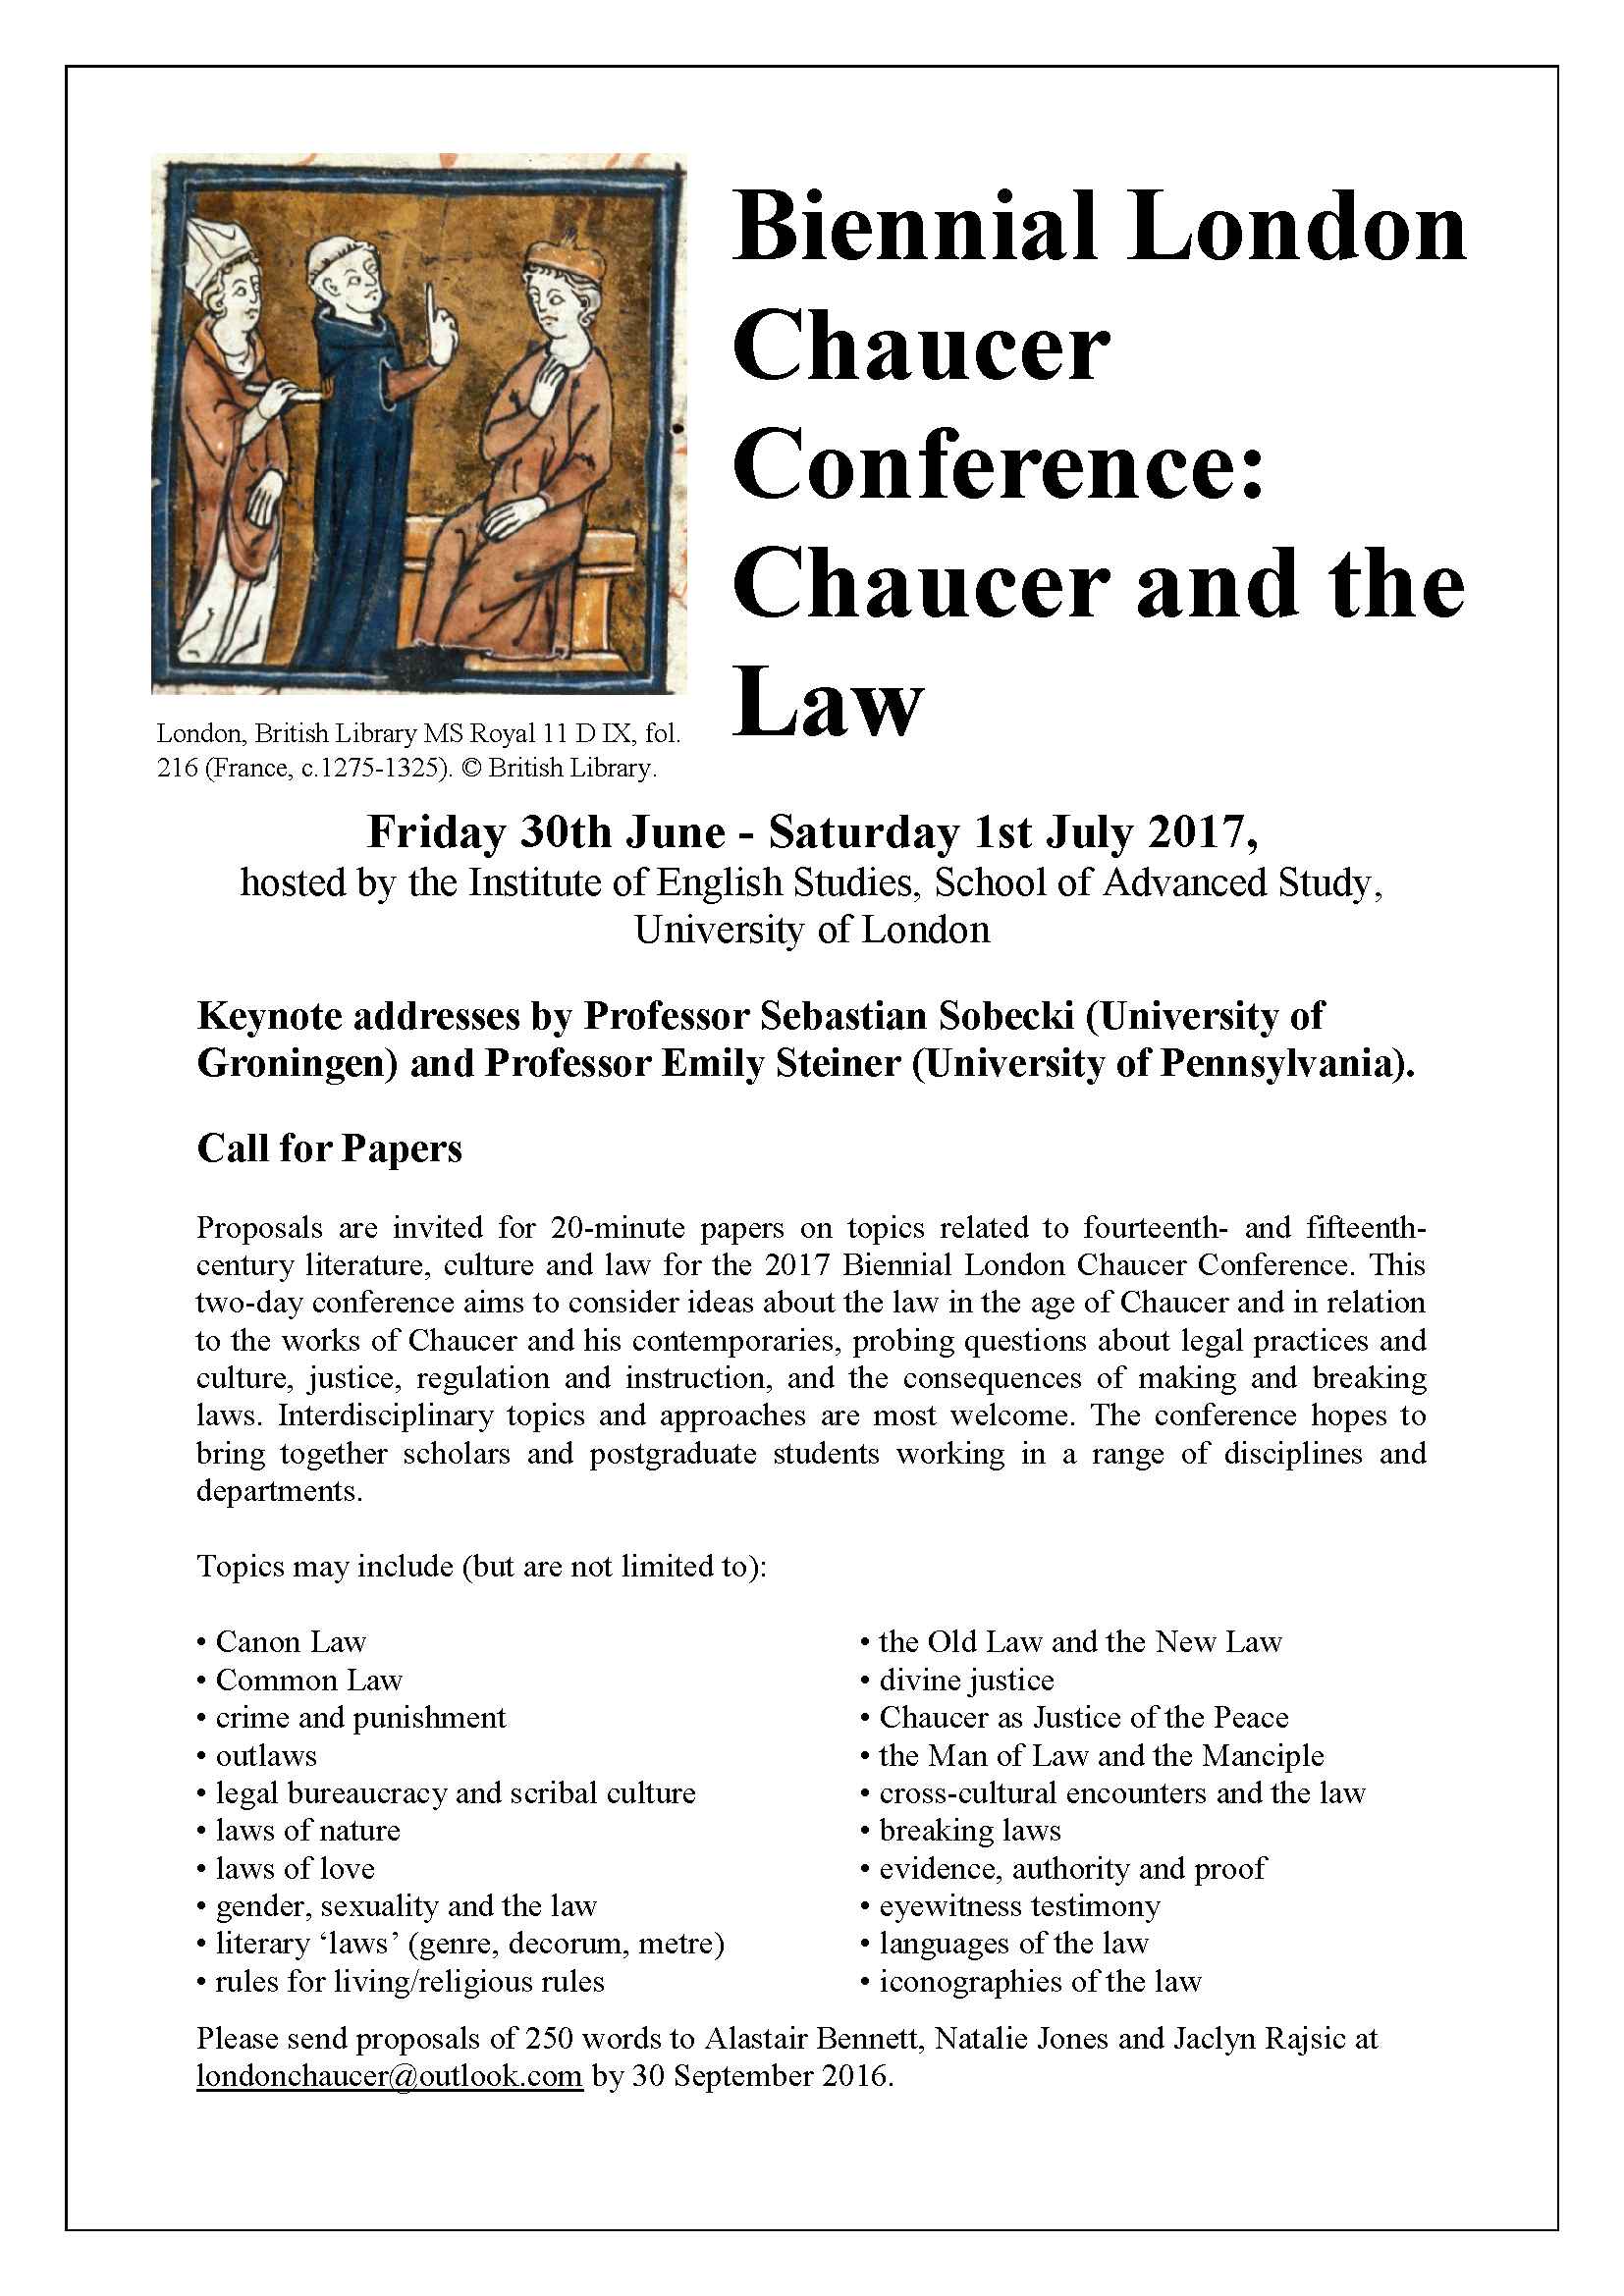 CFP_Chaucer and the Law 2017